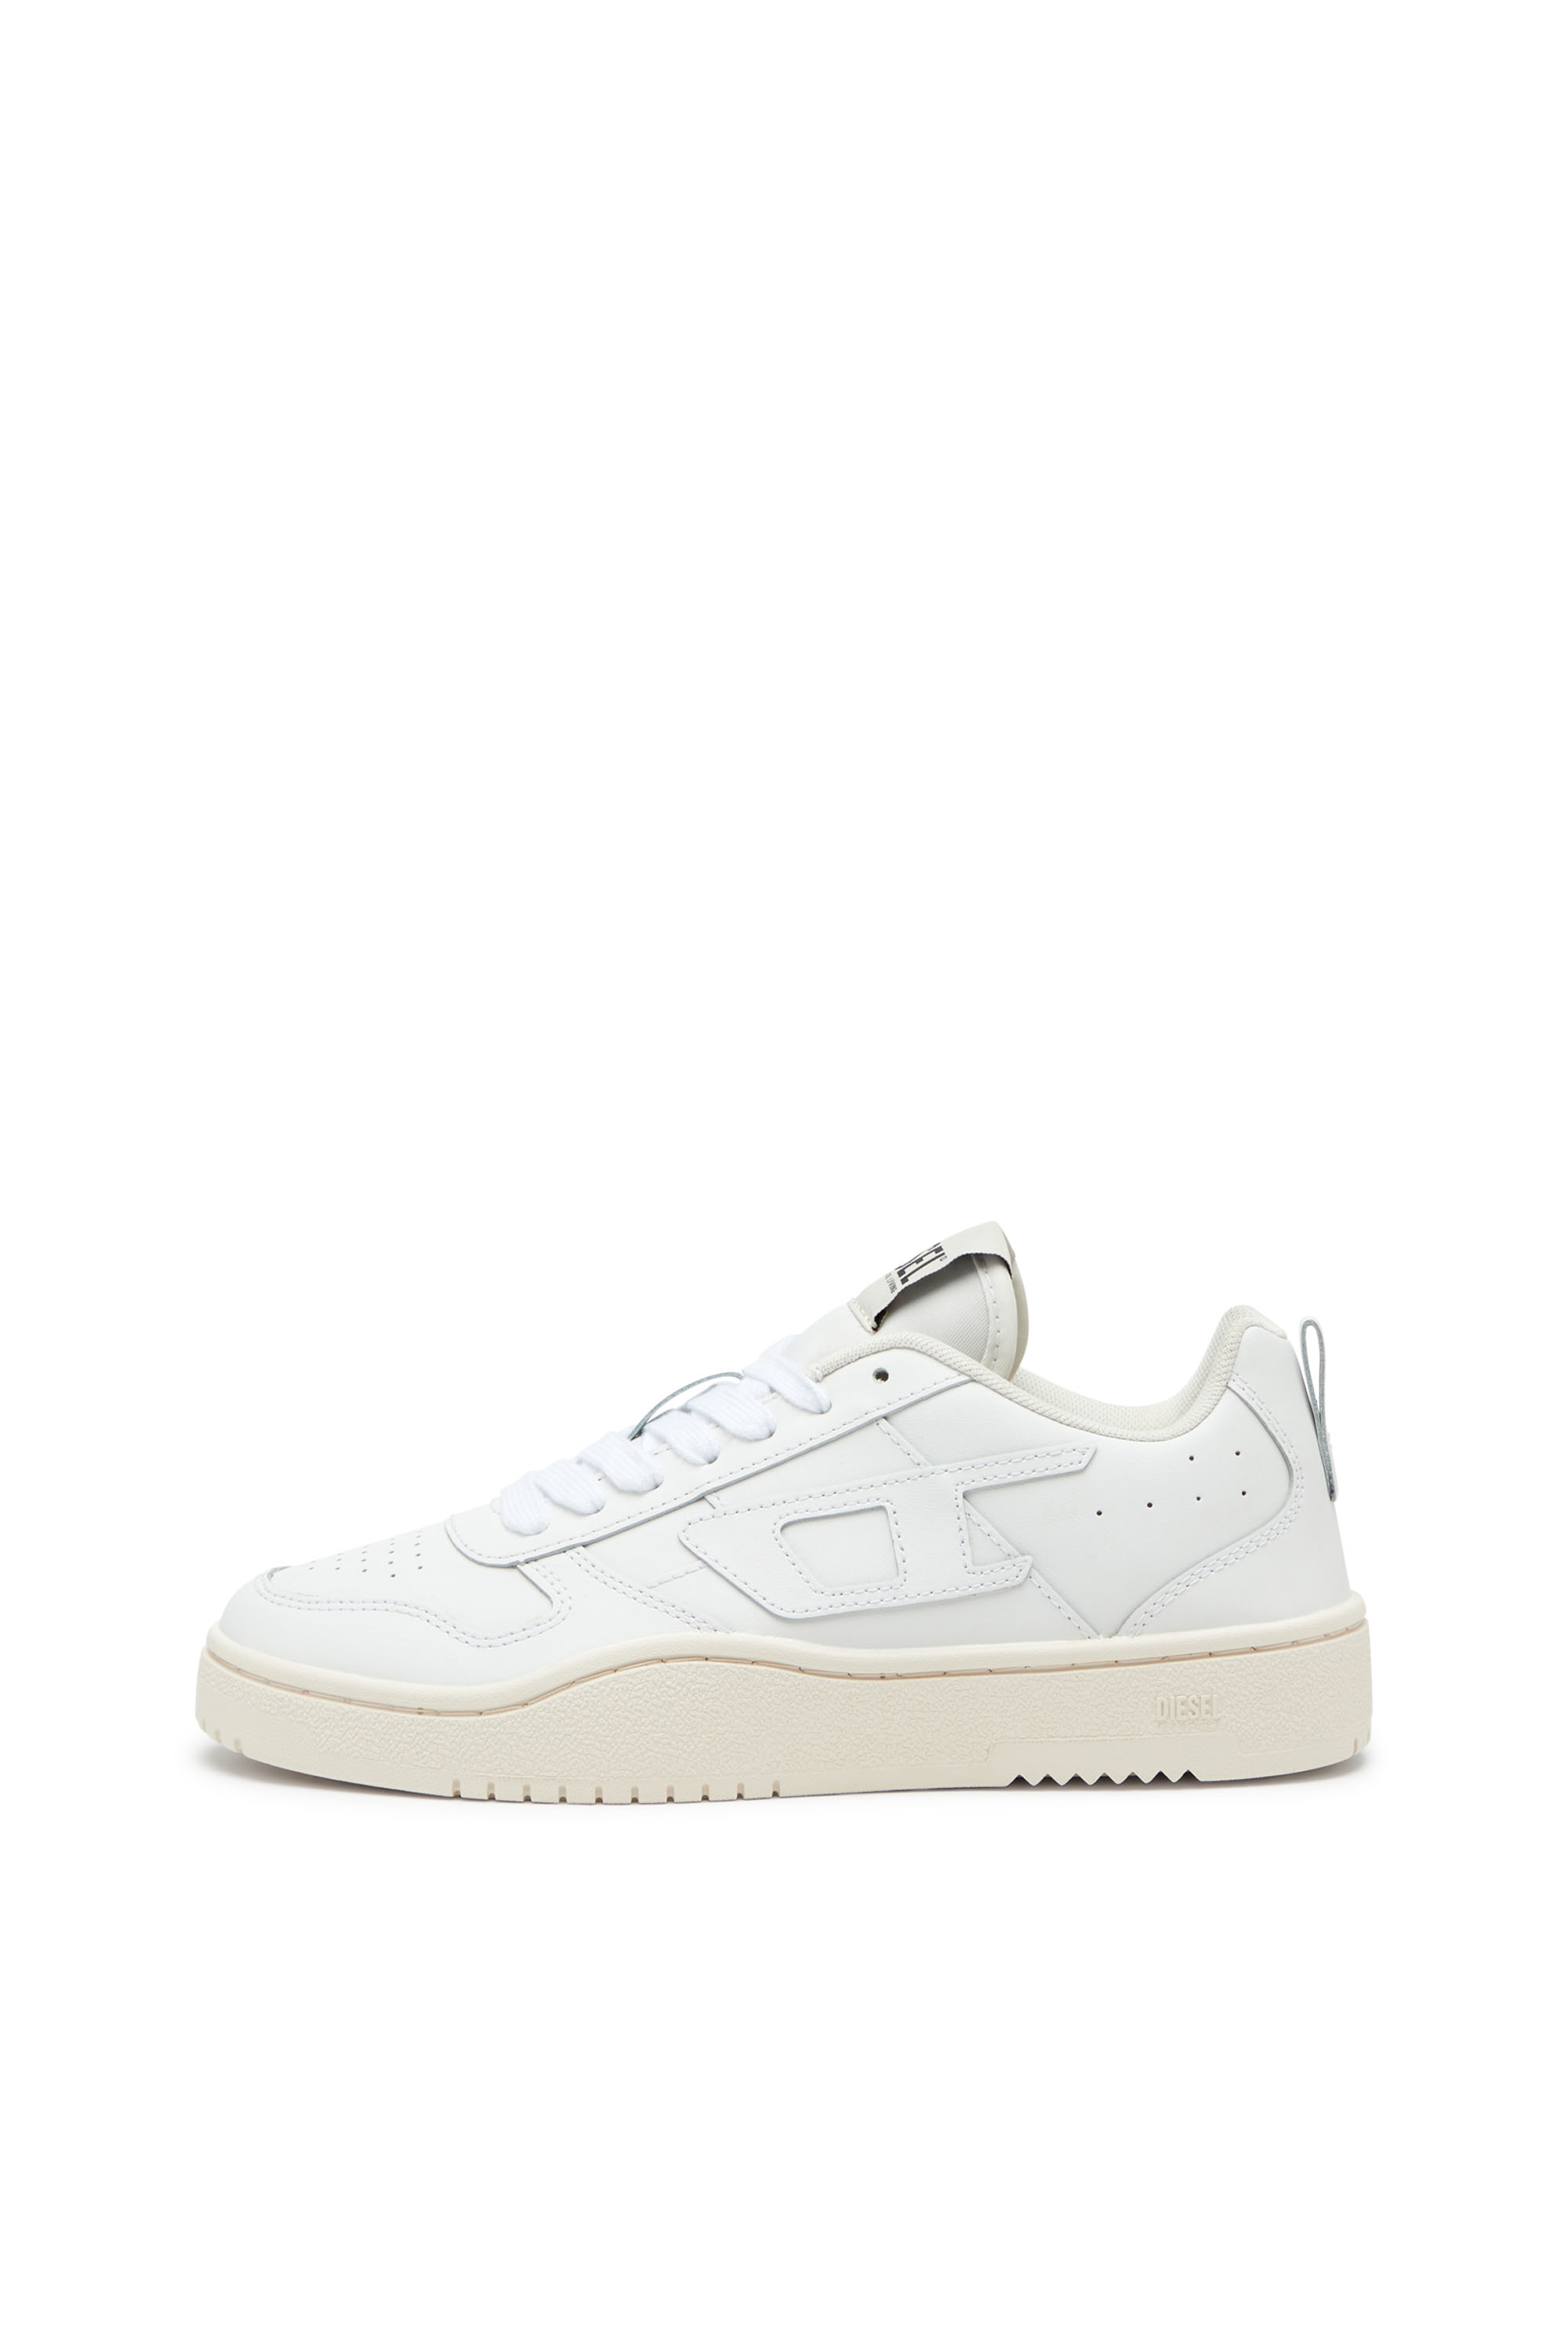 Diesel - S-UKIYO V2 LOW W, Woman S-Ukiyo Low-Low-top sneakers in leather and nylon in White - Image 7